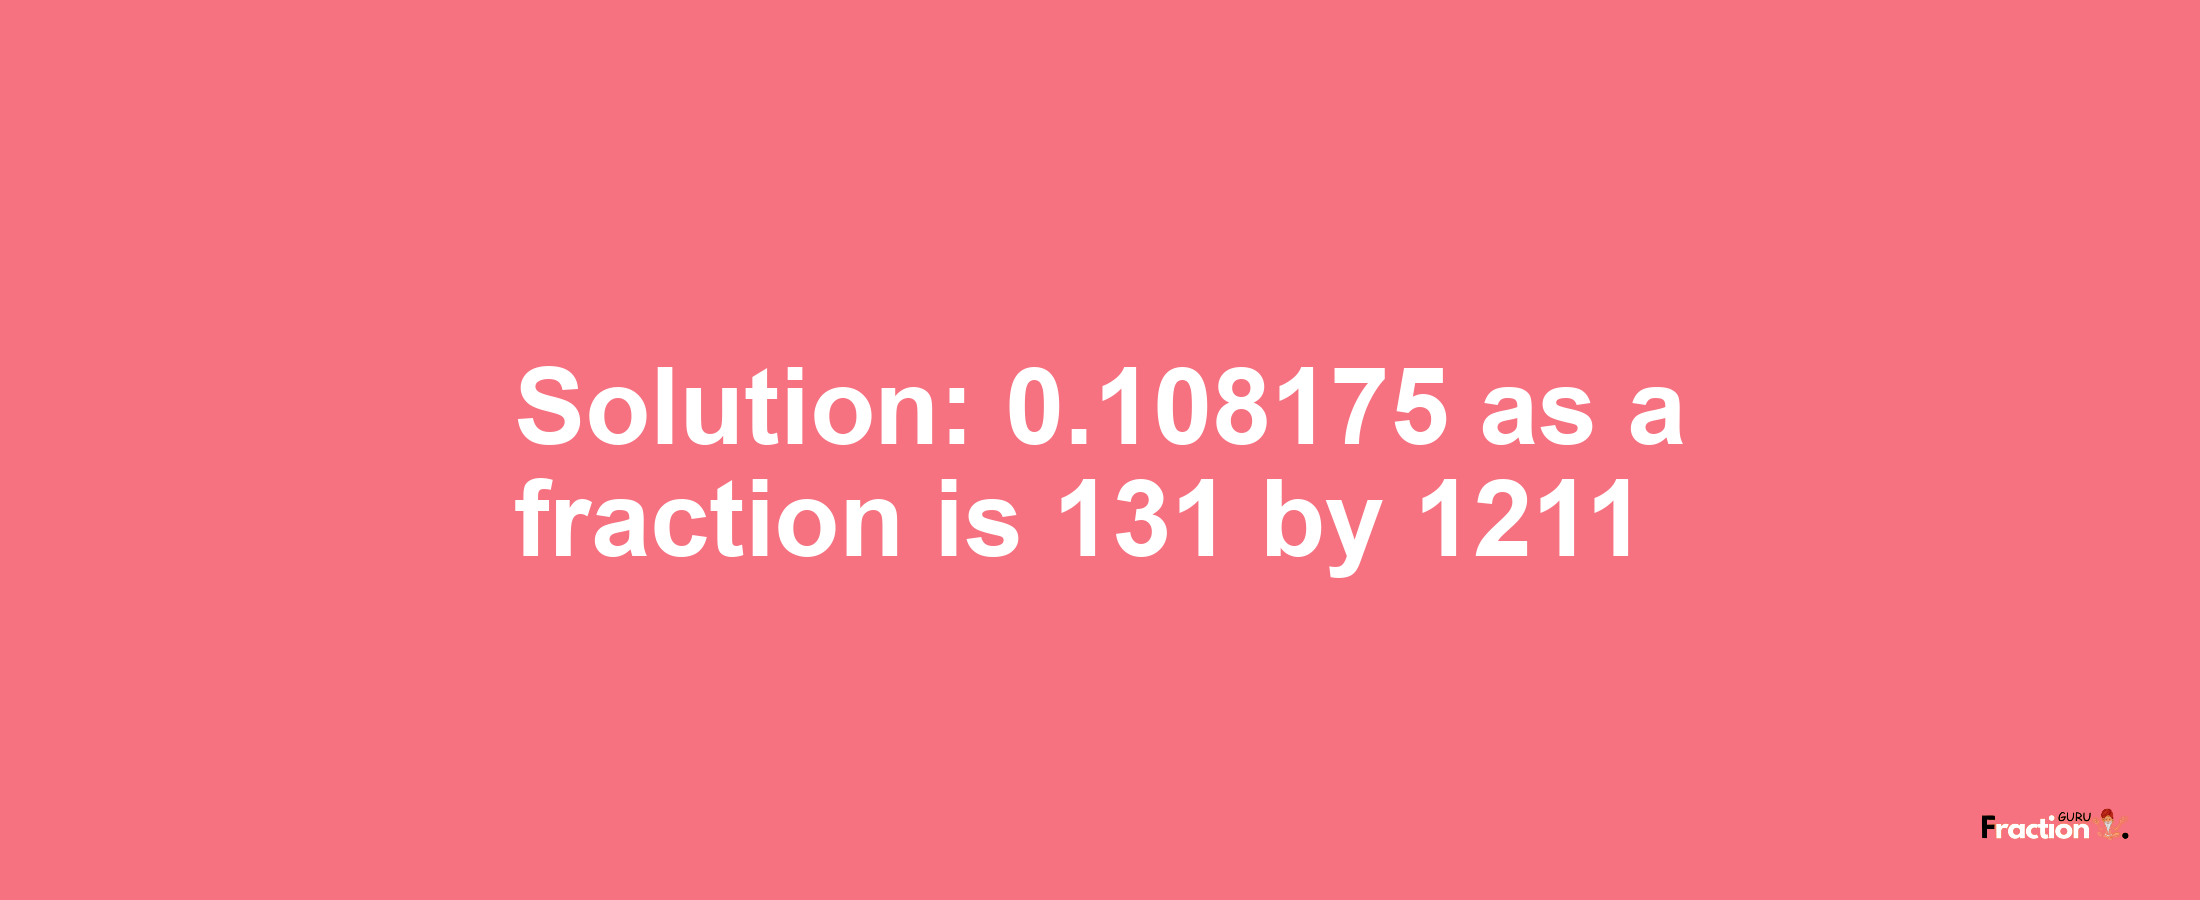 Solution:0.108175 as a fraction is 131/1211